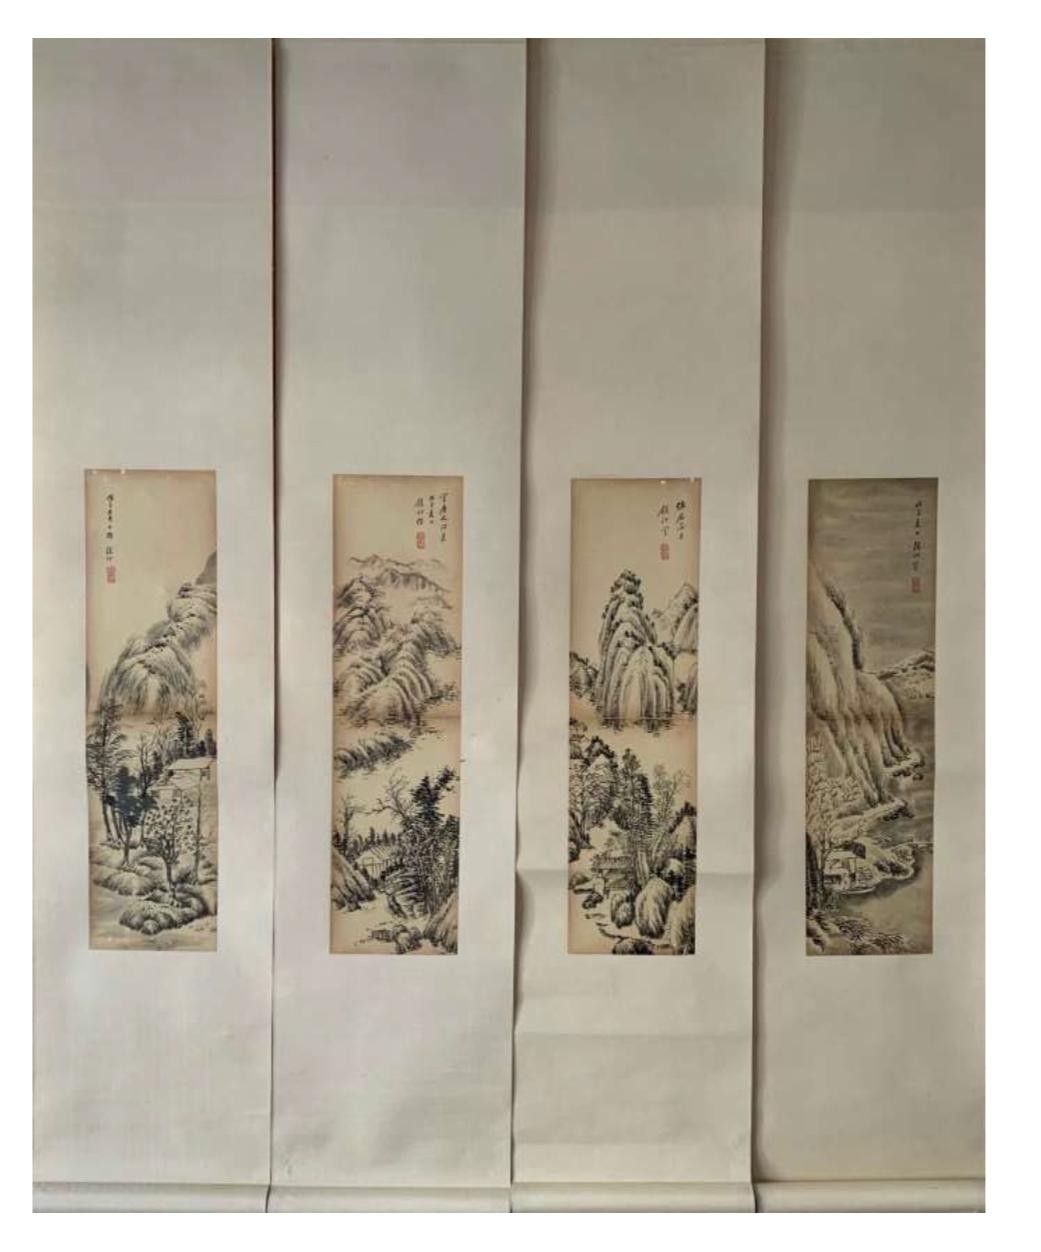 Landscape: Imitates Wang Hui's style. Chinese ink on paper scroll. Attribute to Wu Jingting. 49.